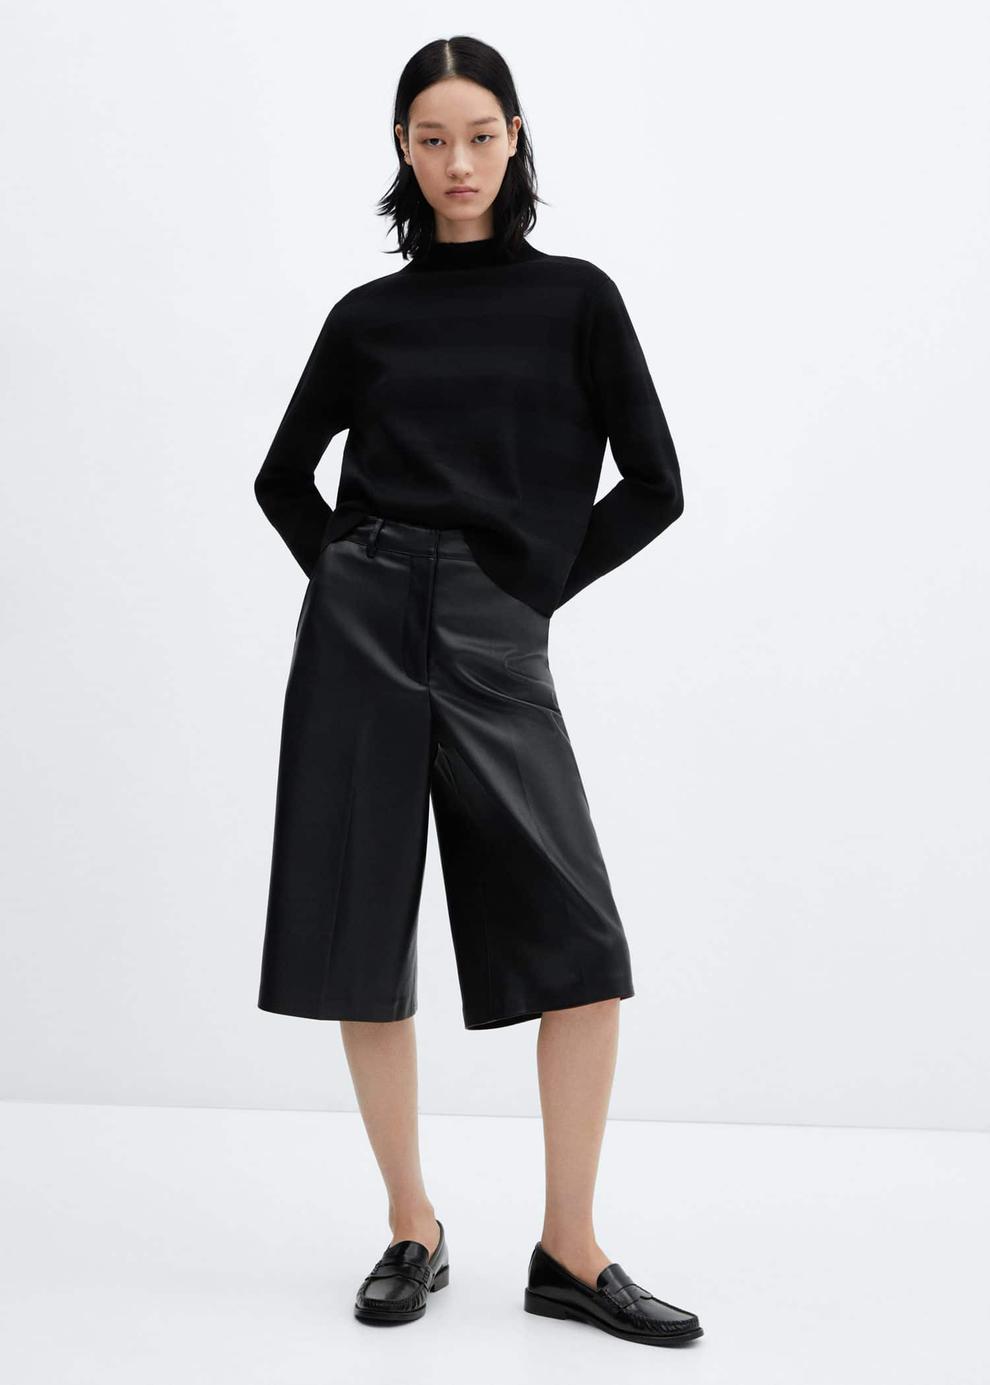 High collar sweater offers at $34.99 in Mango